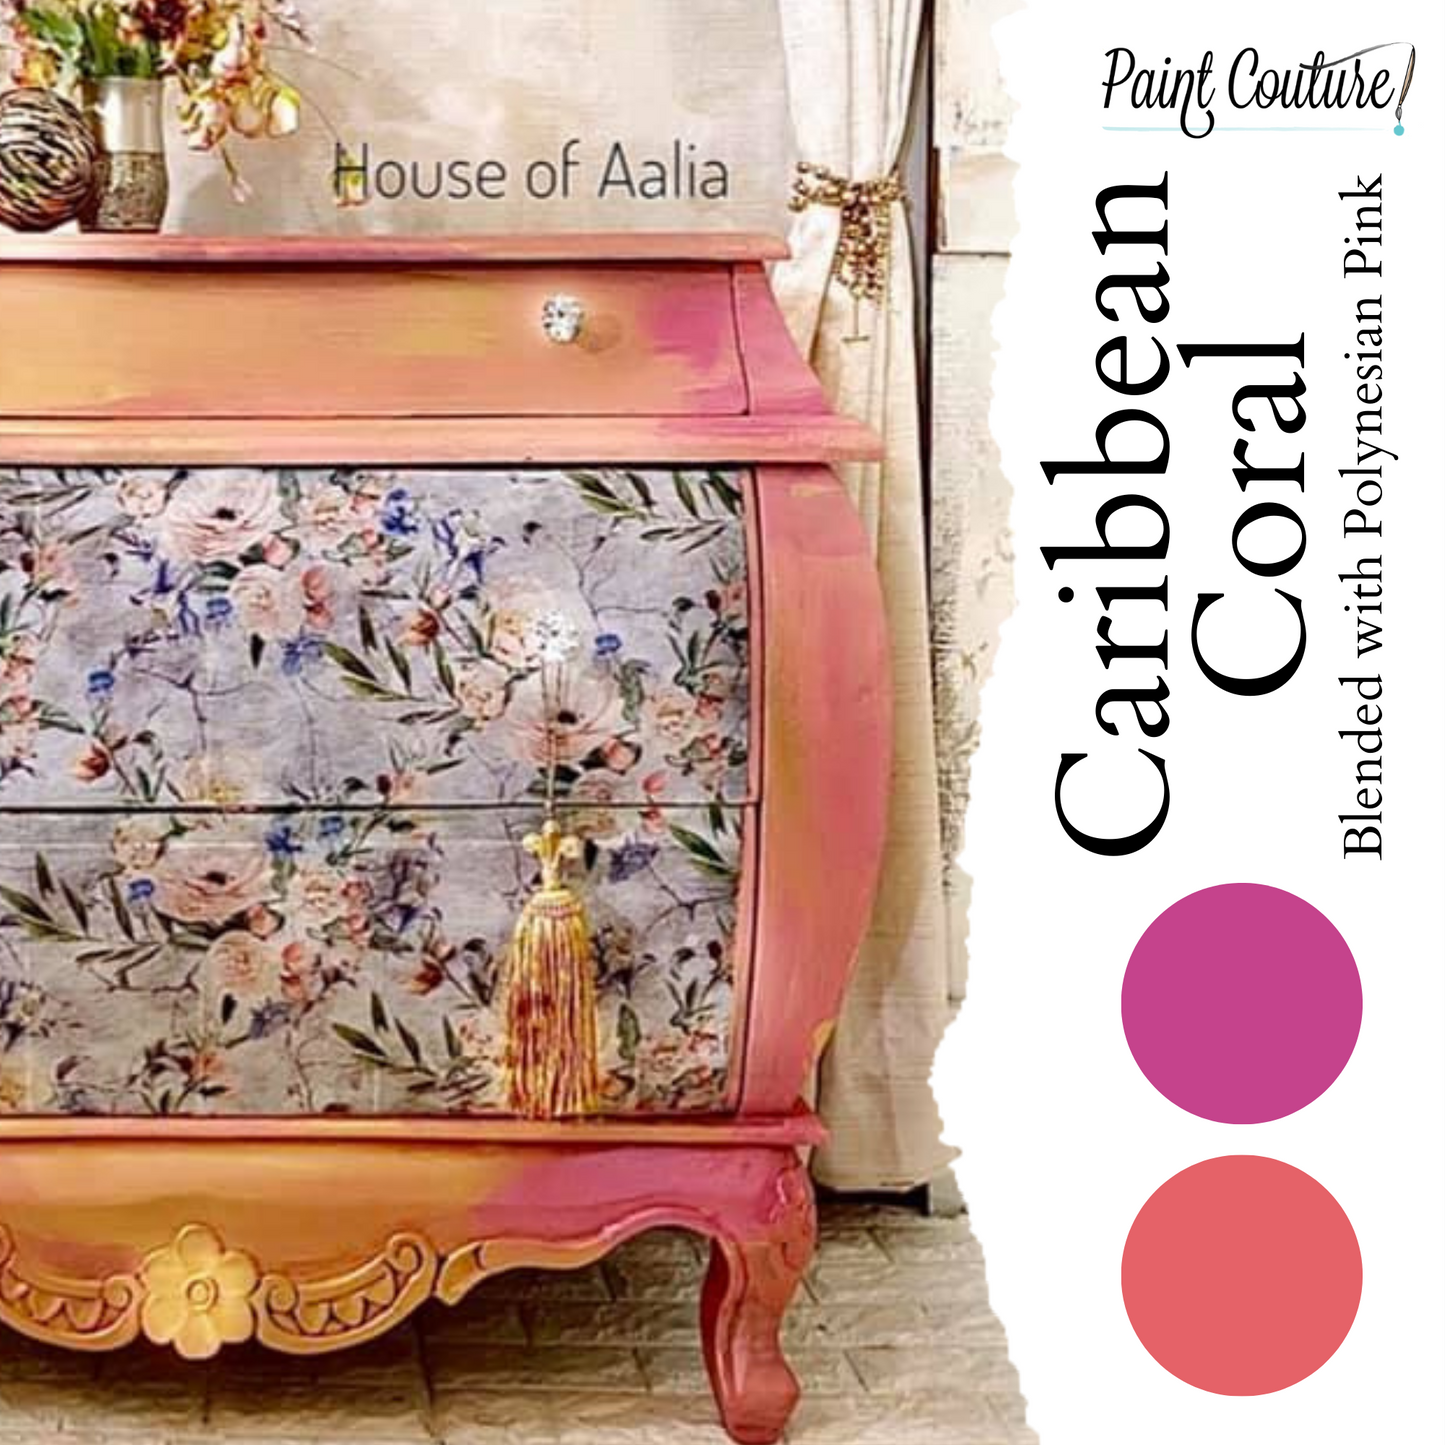 Paint Couture Caribbean Coral